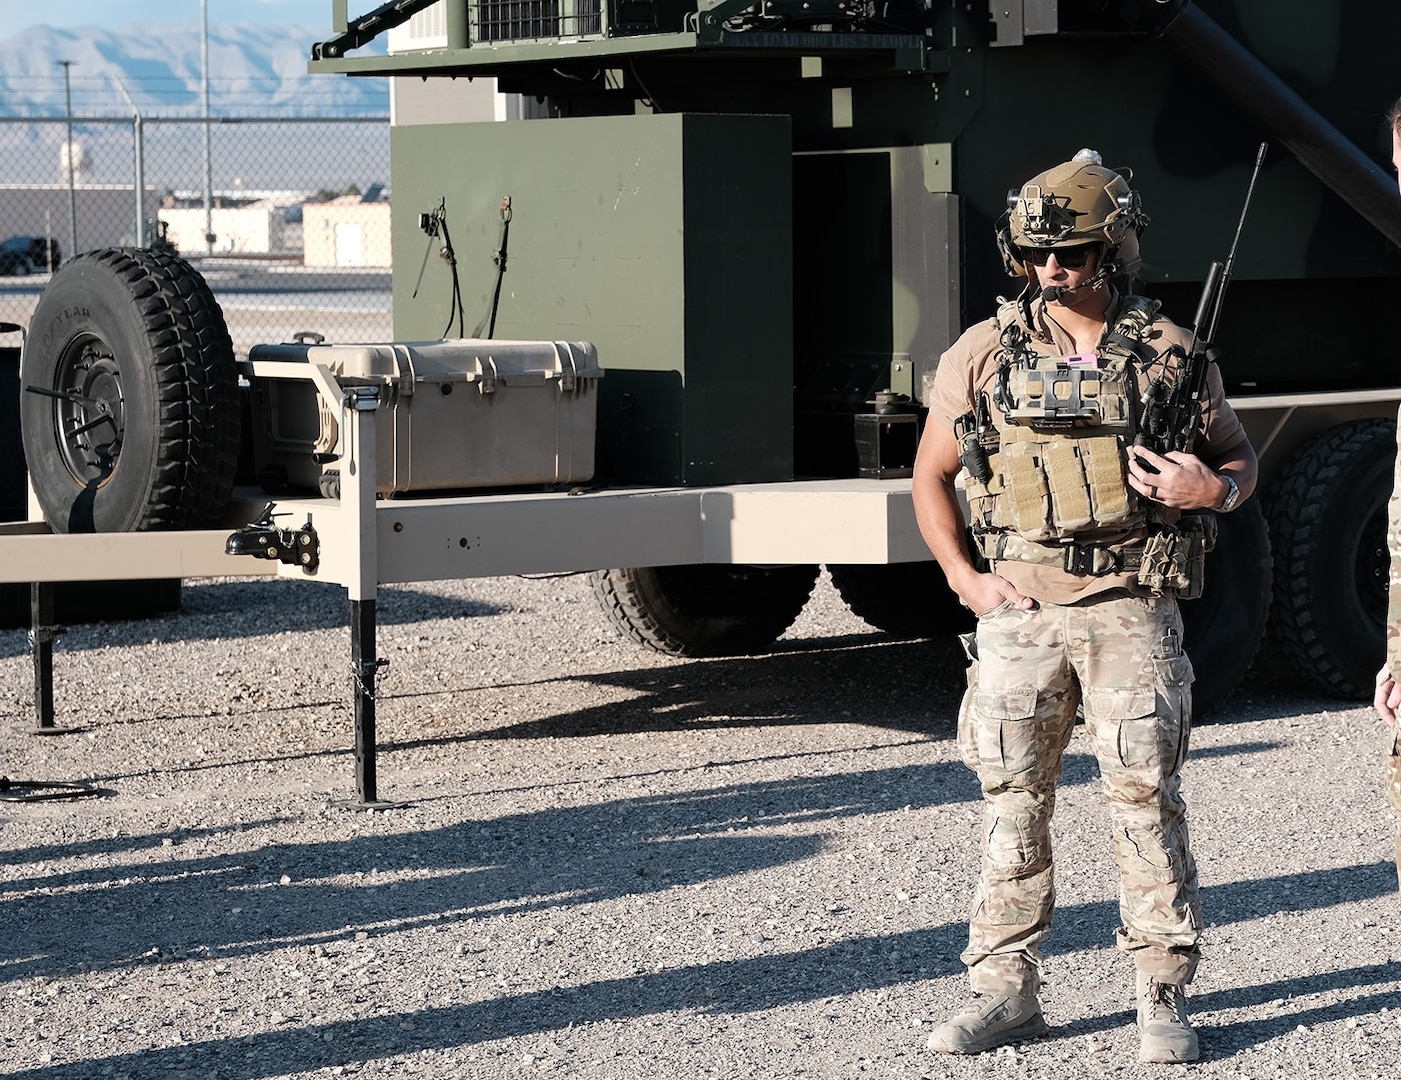 photo U.S. Air Force military member wearing combat gear stands near military vehicles